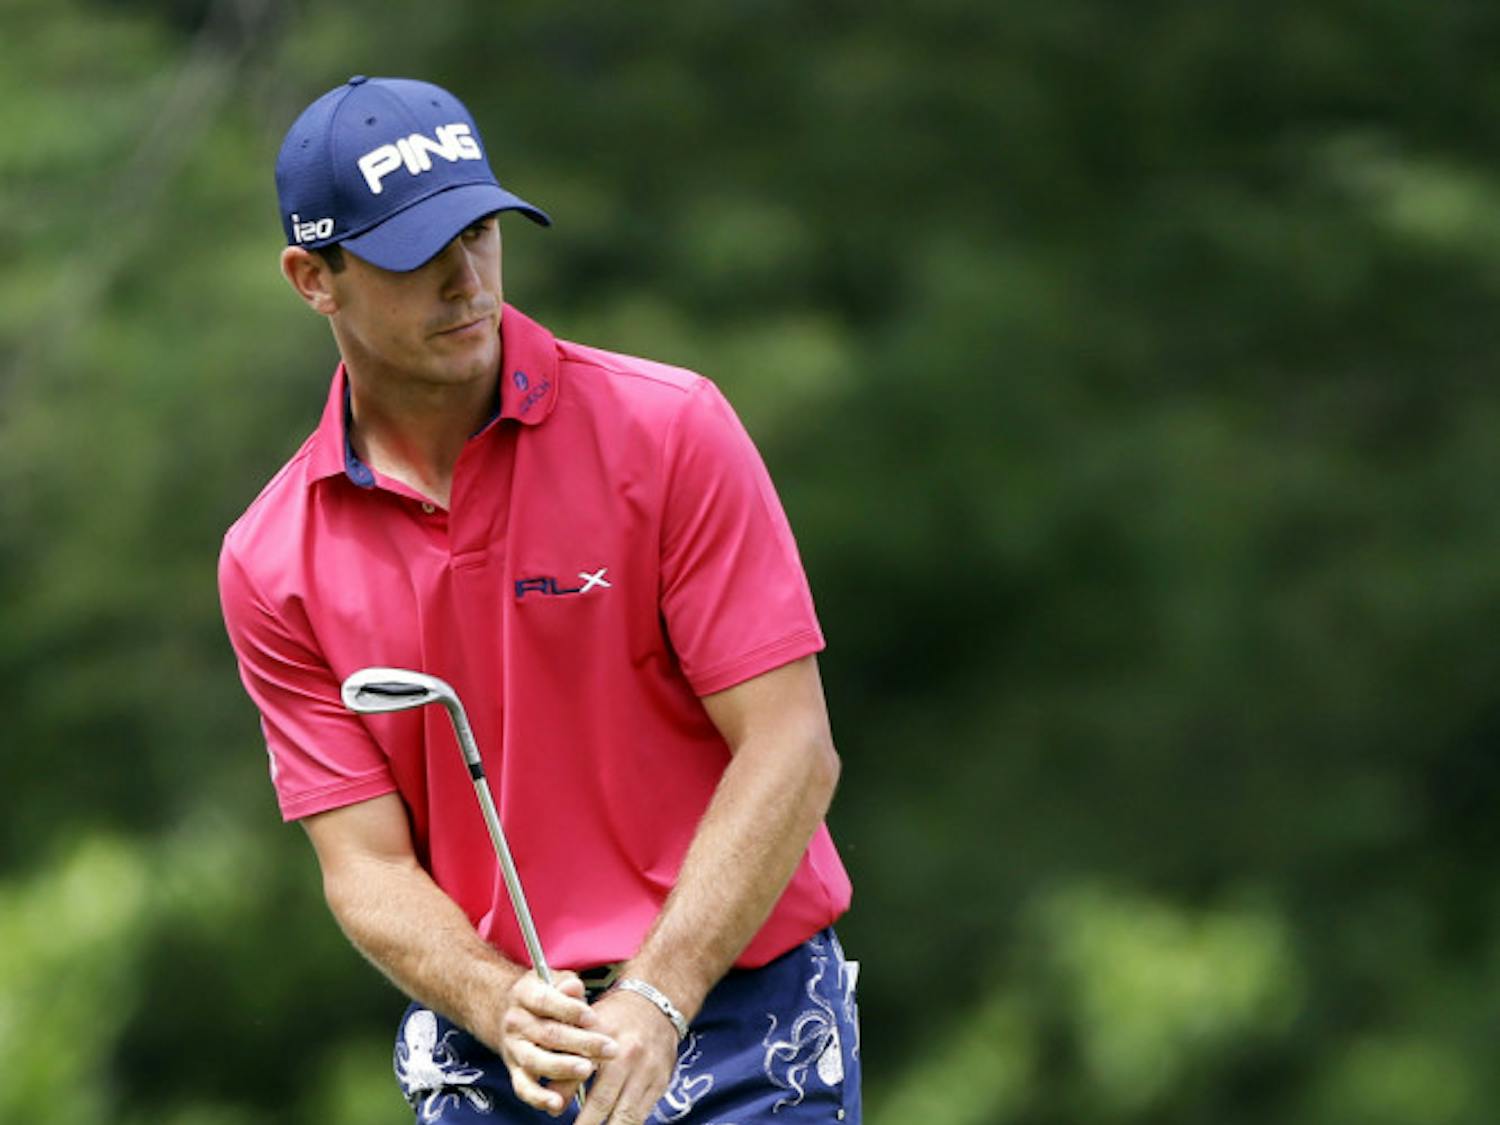 Billy Horschel watches a putt on the second green during the fourth round of the U.S. Open golf tournament at Merion Golf Club, Sunday, June 16, 2013, in Ardmore, Pa. 